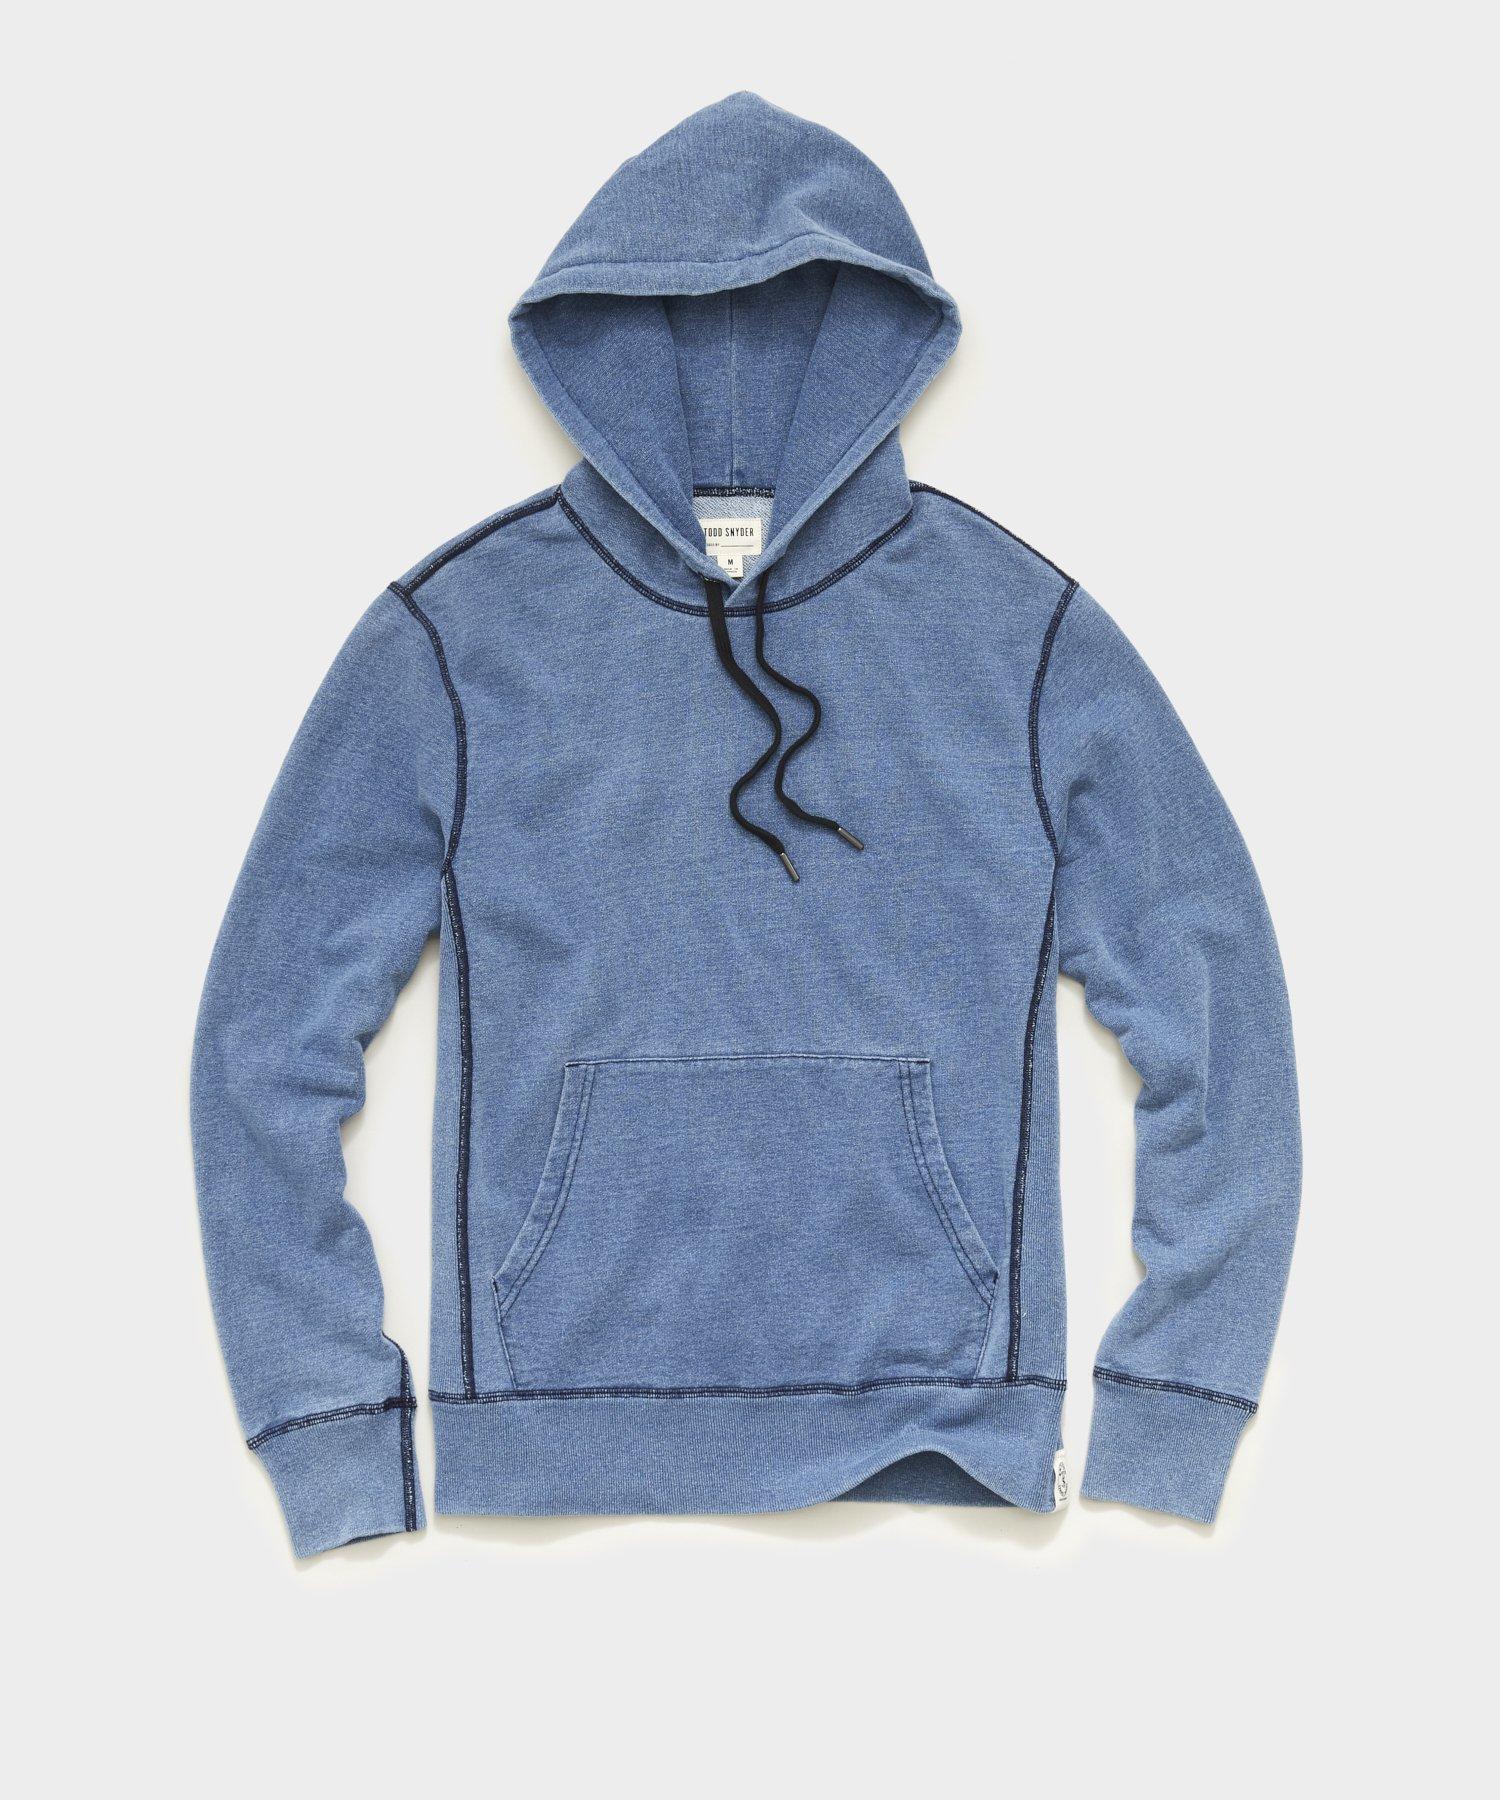 Todd Snyder Cotton Issued By: Popover Hoodie in Light Indigo (Blue) for ...